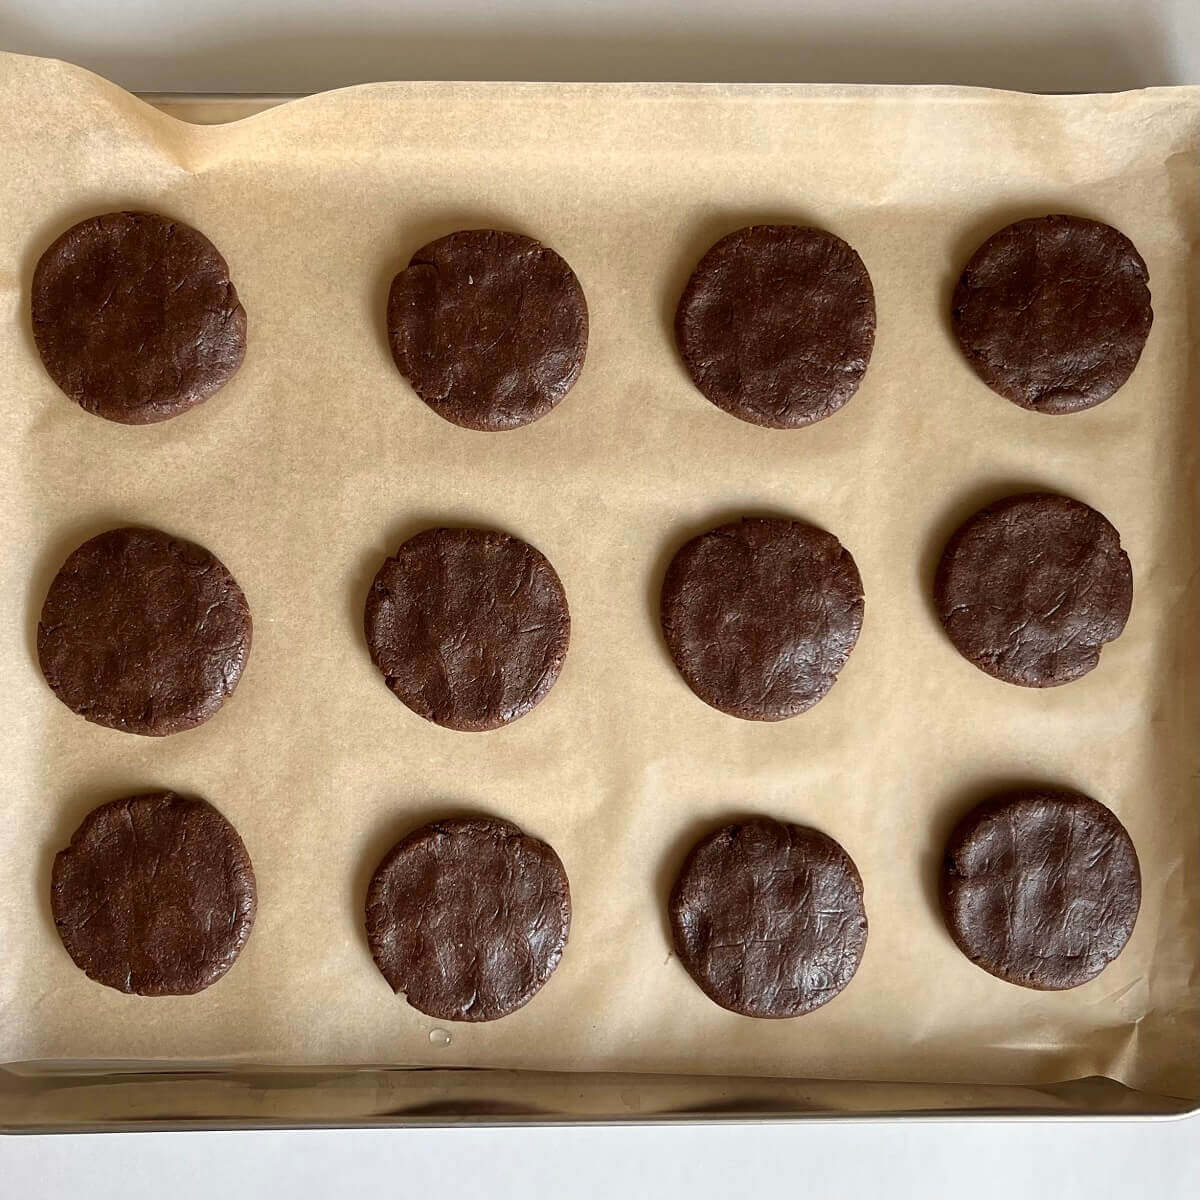 Raw cookies made with carob on a sheet pan lined with parchment paper.